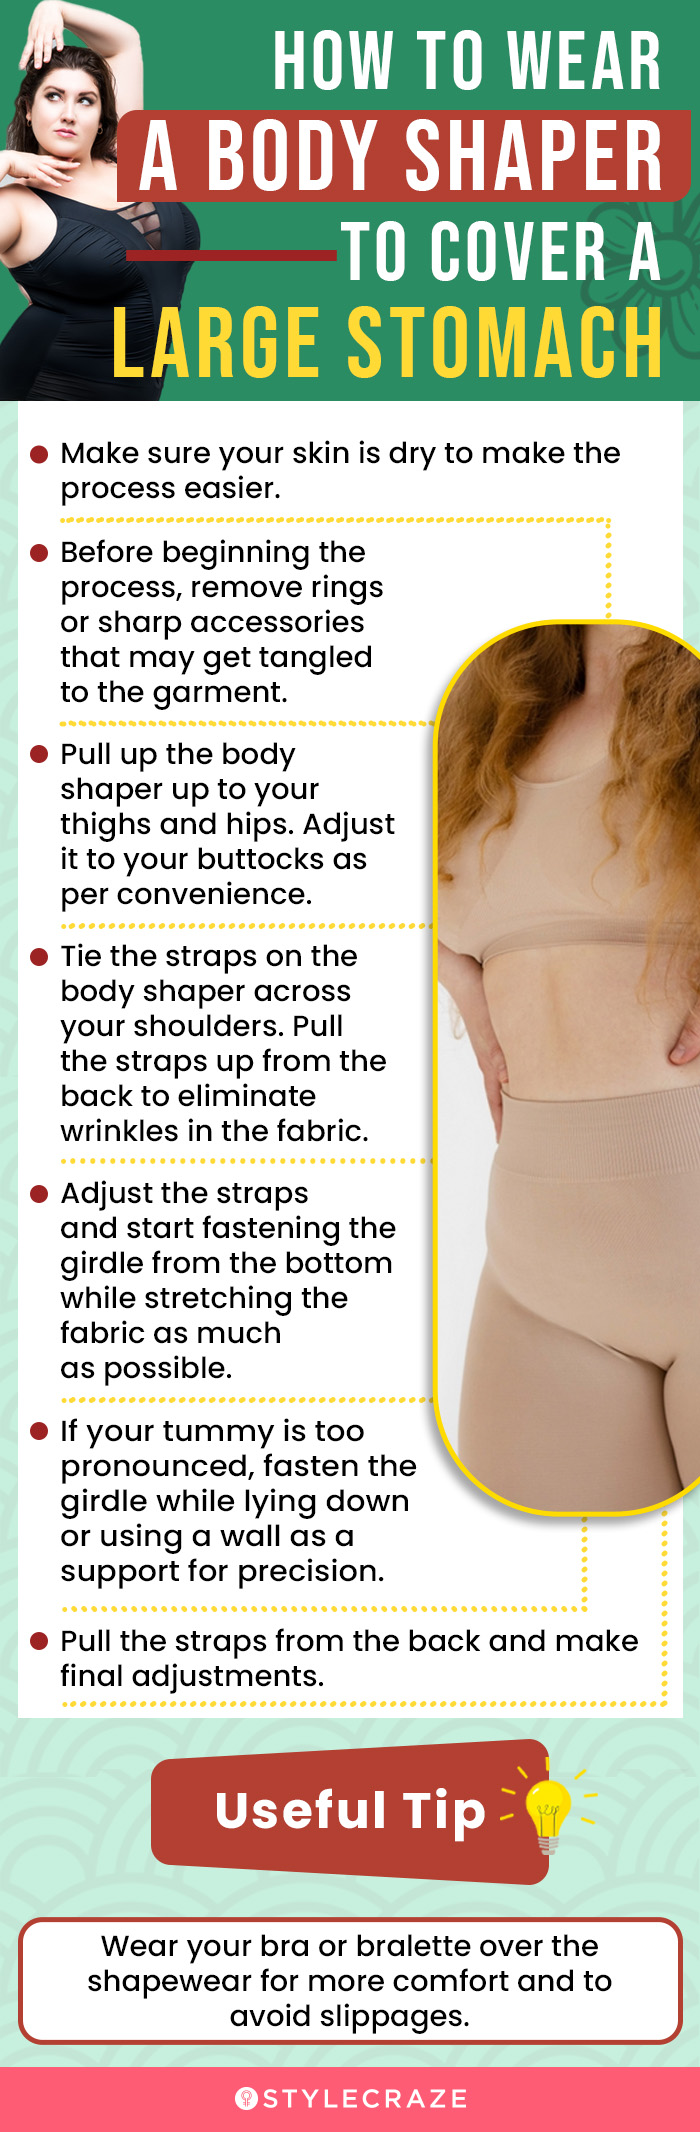 How To Wear A Body Shaper To Cover Large Stomach (infographic)